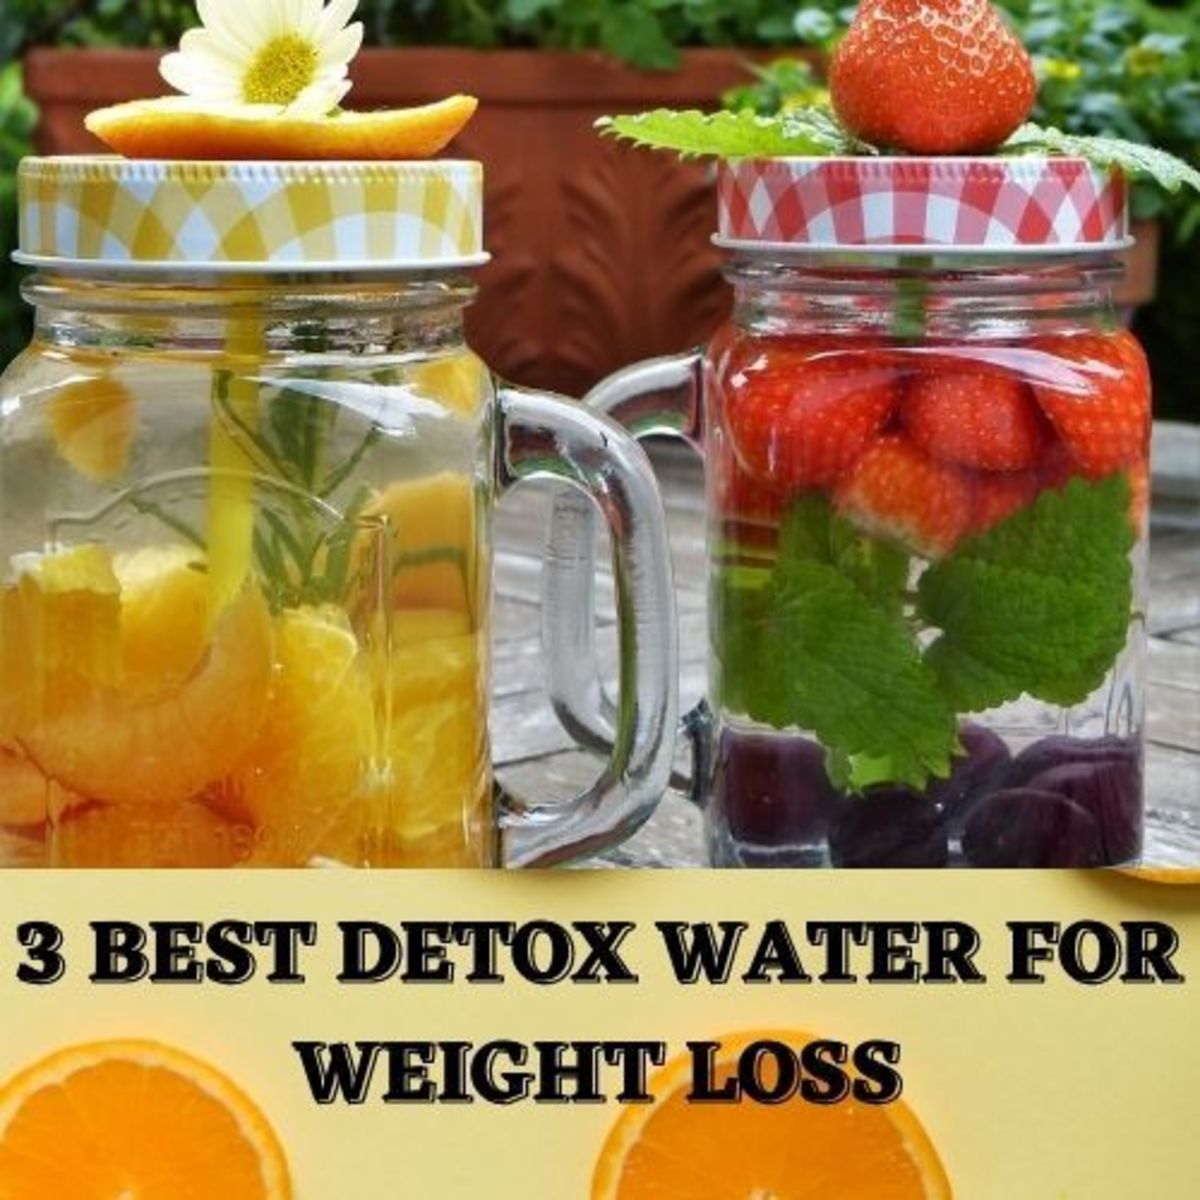 3 Best Detox Water for Weight Loss - HubPages